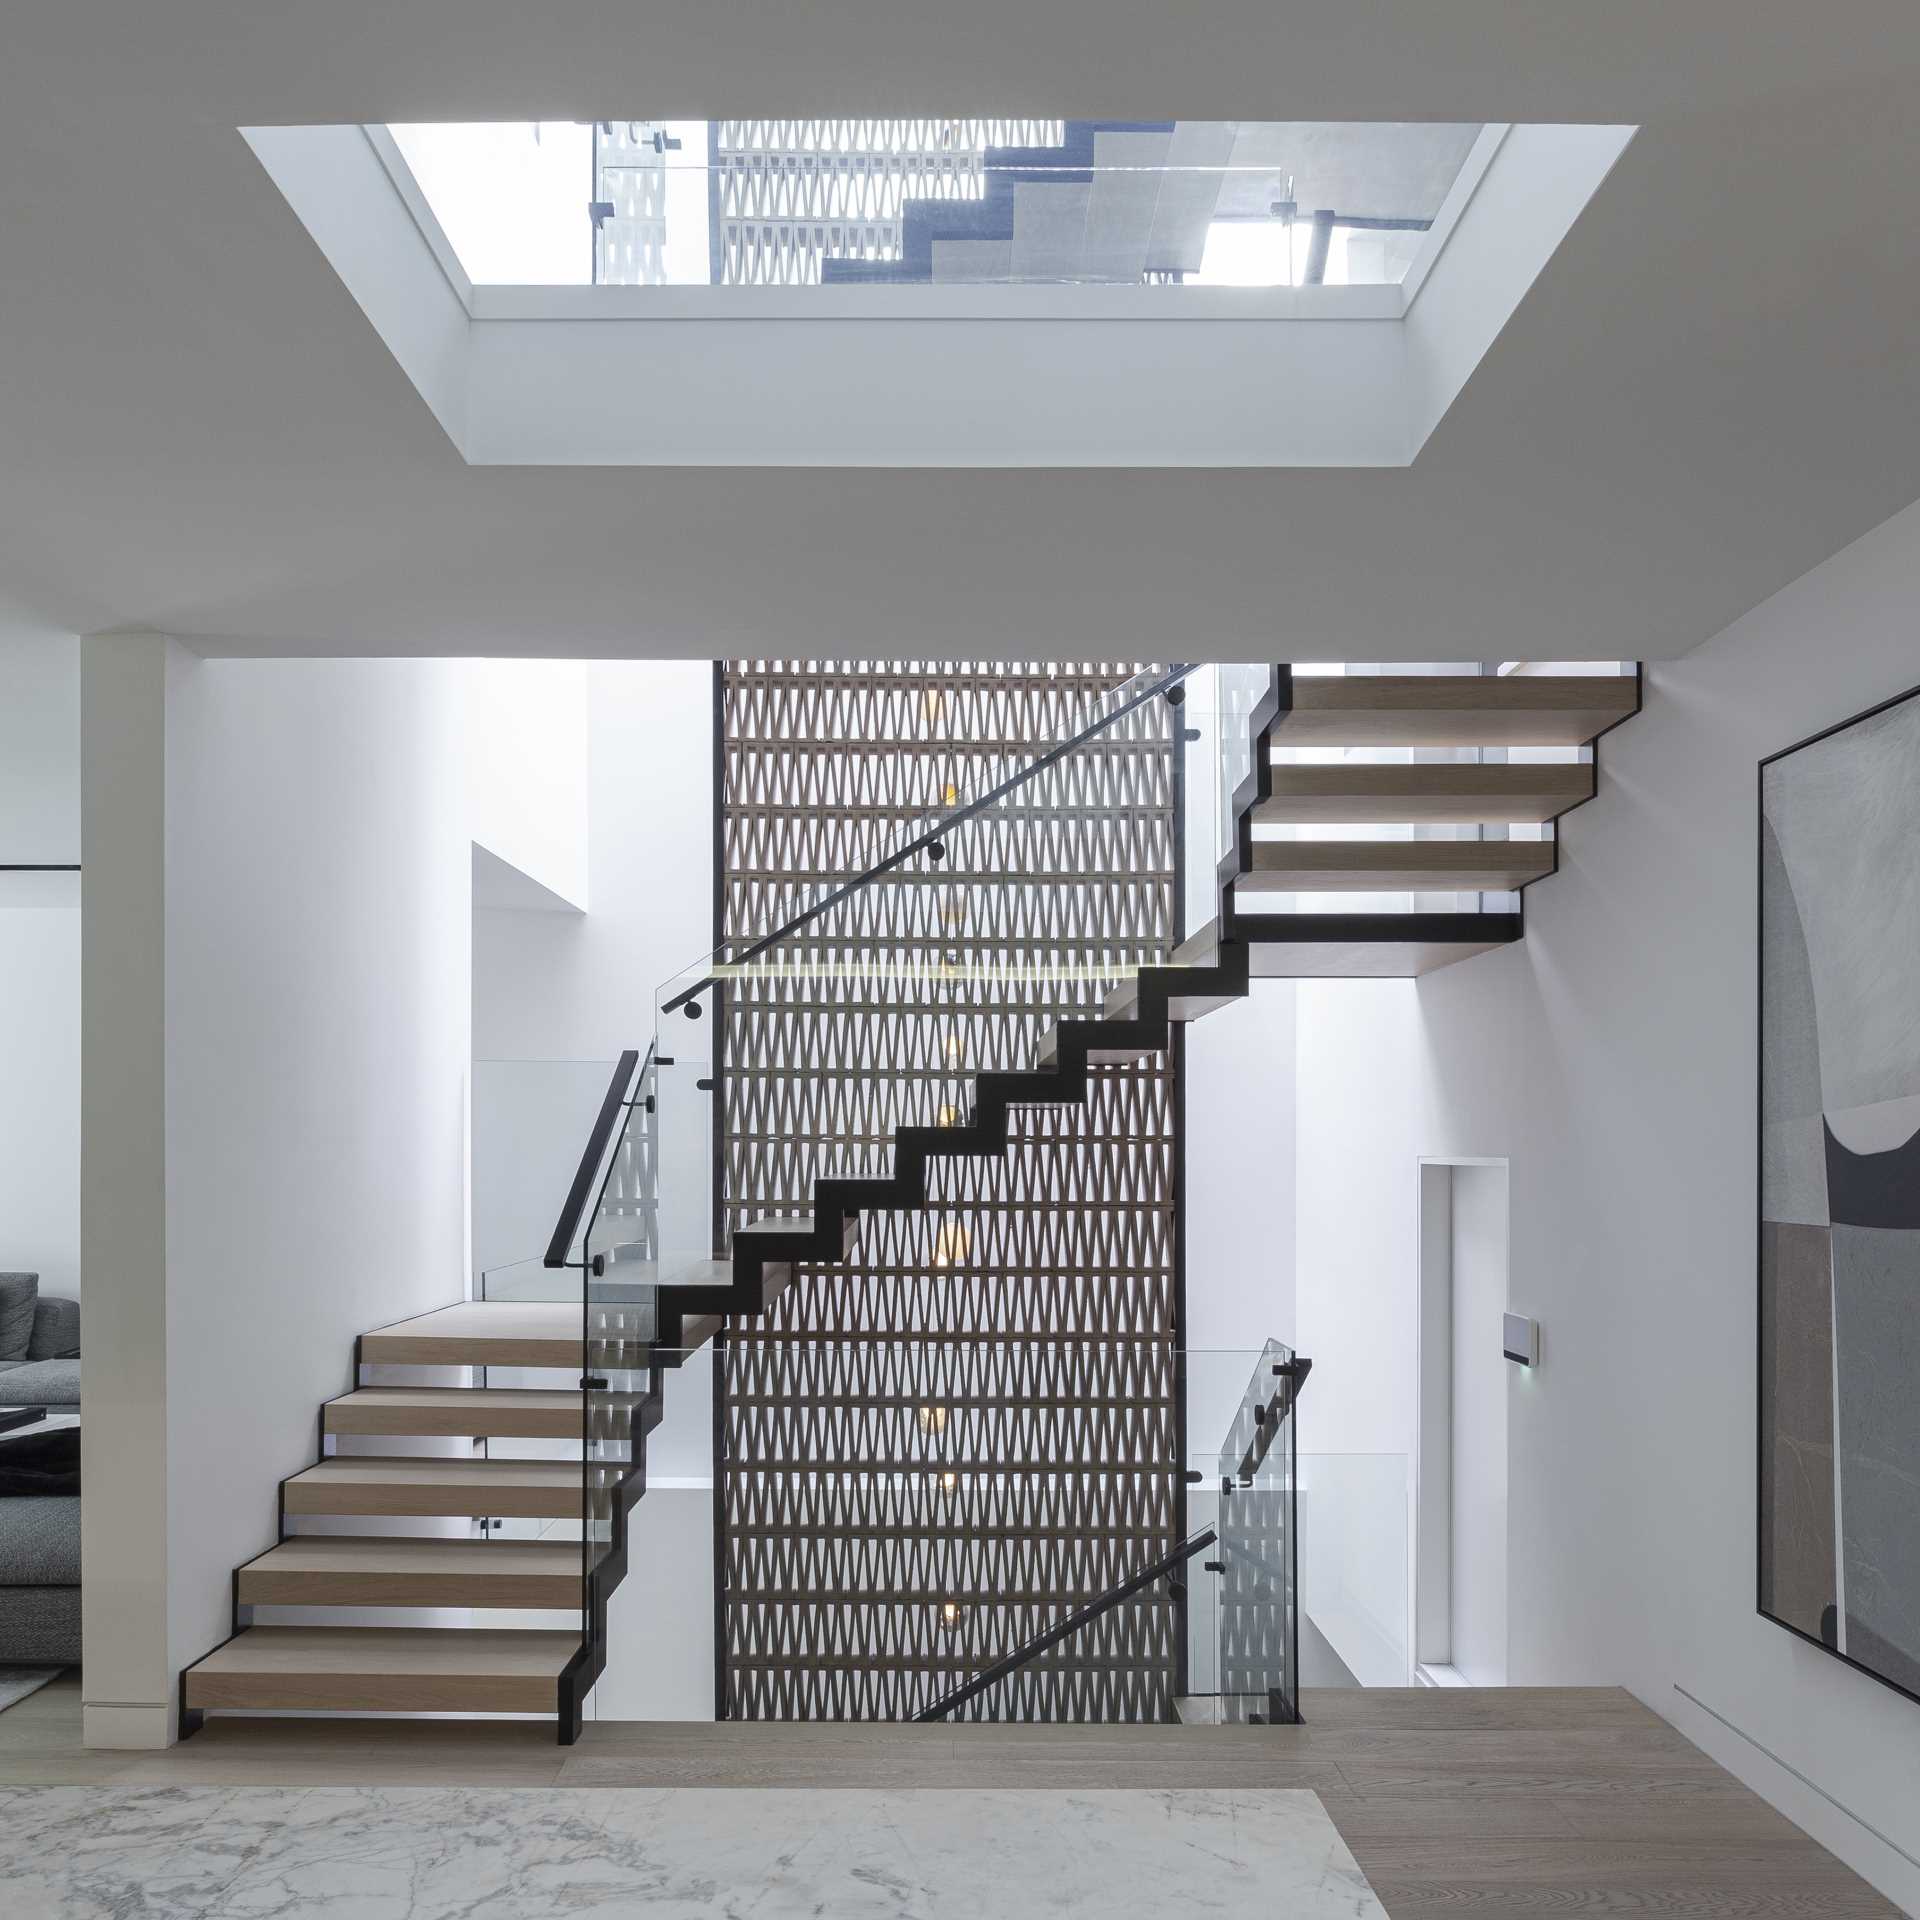 A modern staircase connects the various levels of this modern home.